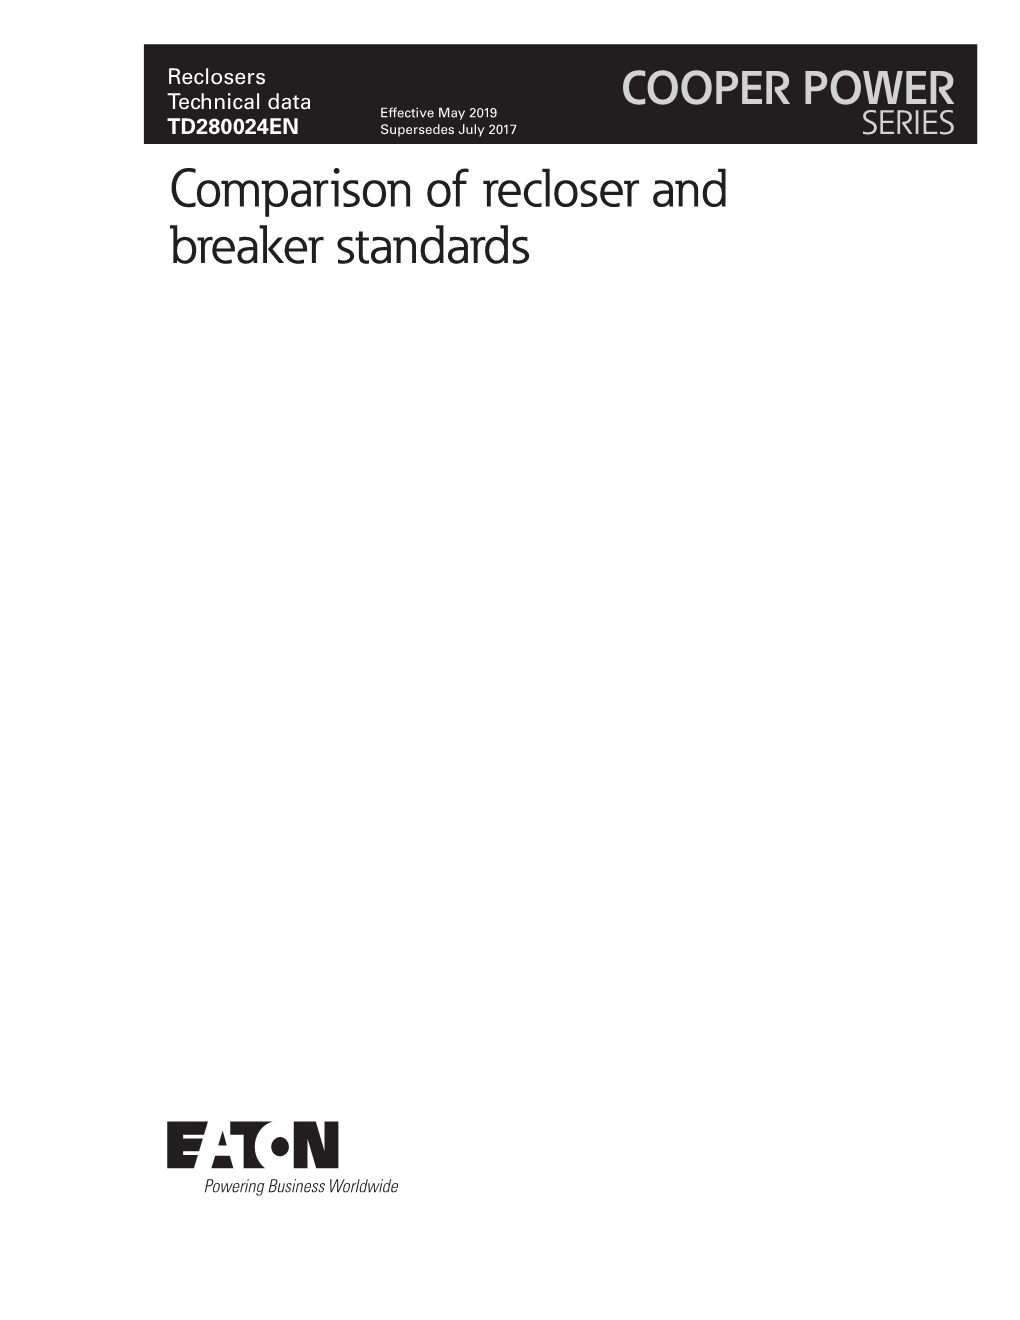 Comparison of Recloser and Breaker Standards Technical Data TD280024EN Comparison of Recloser and Breaker Standards Effective May 2019